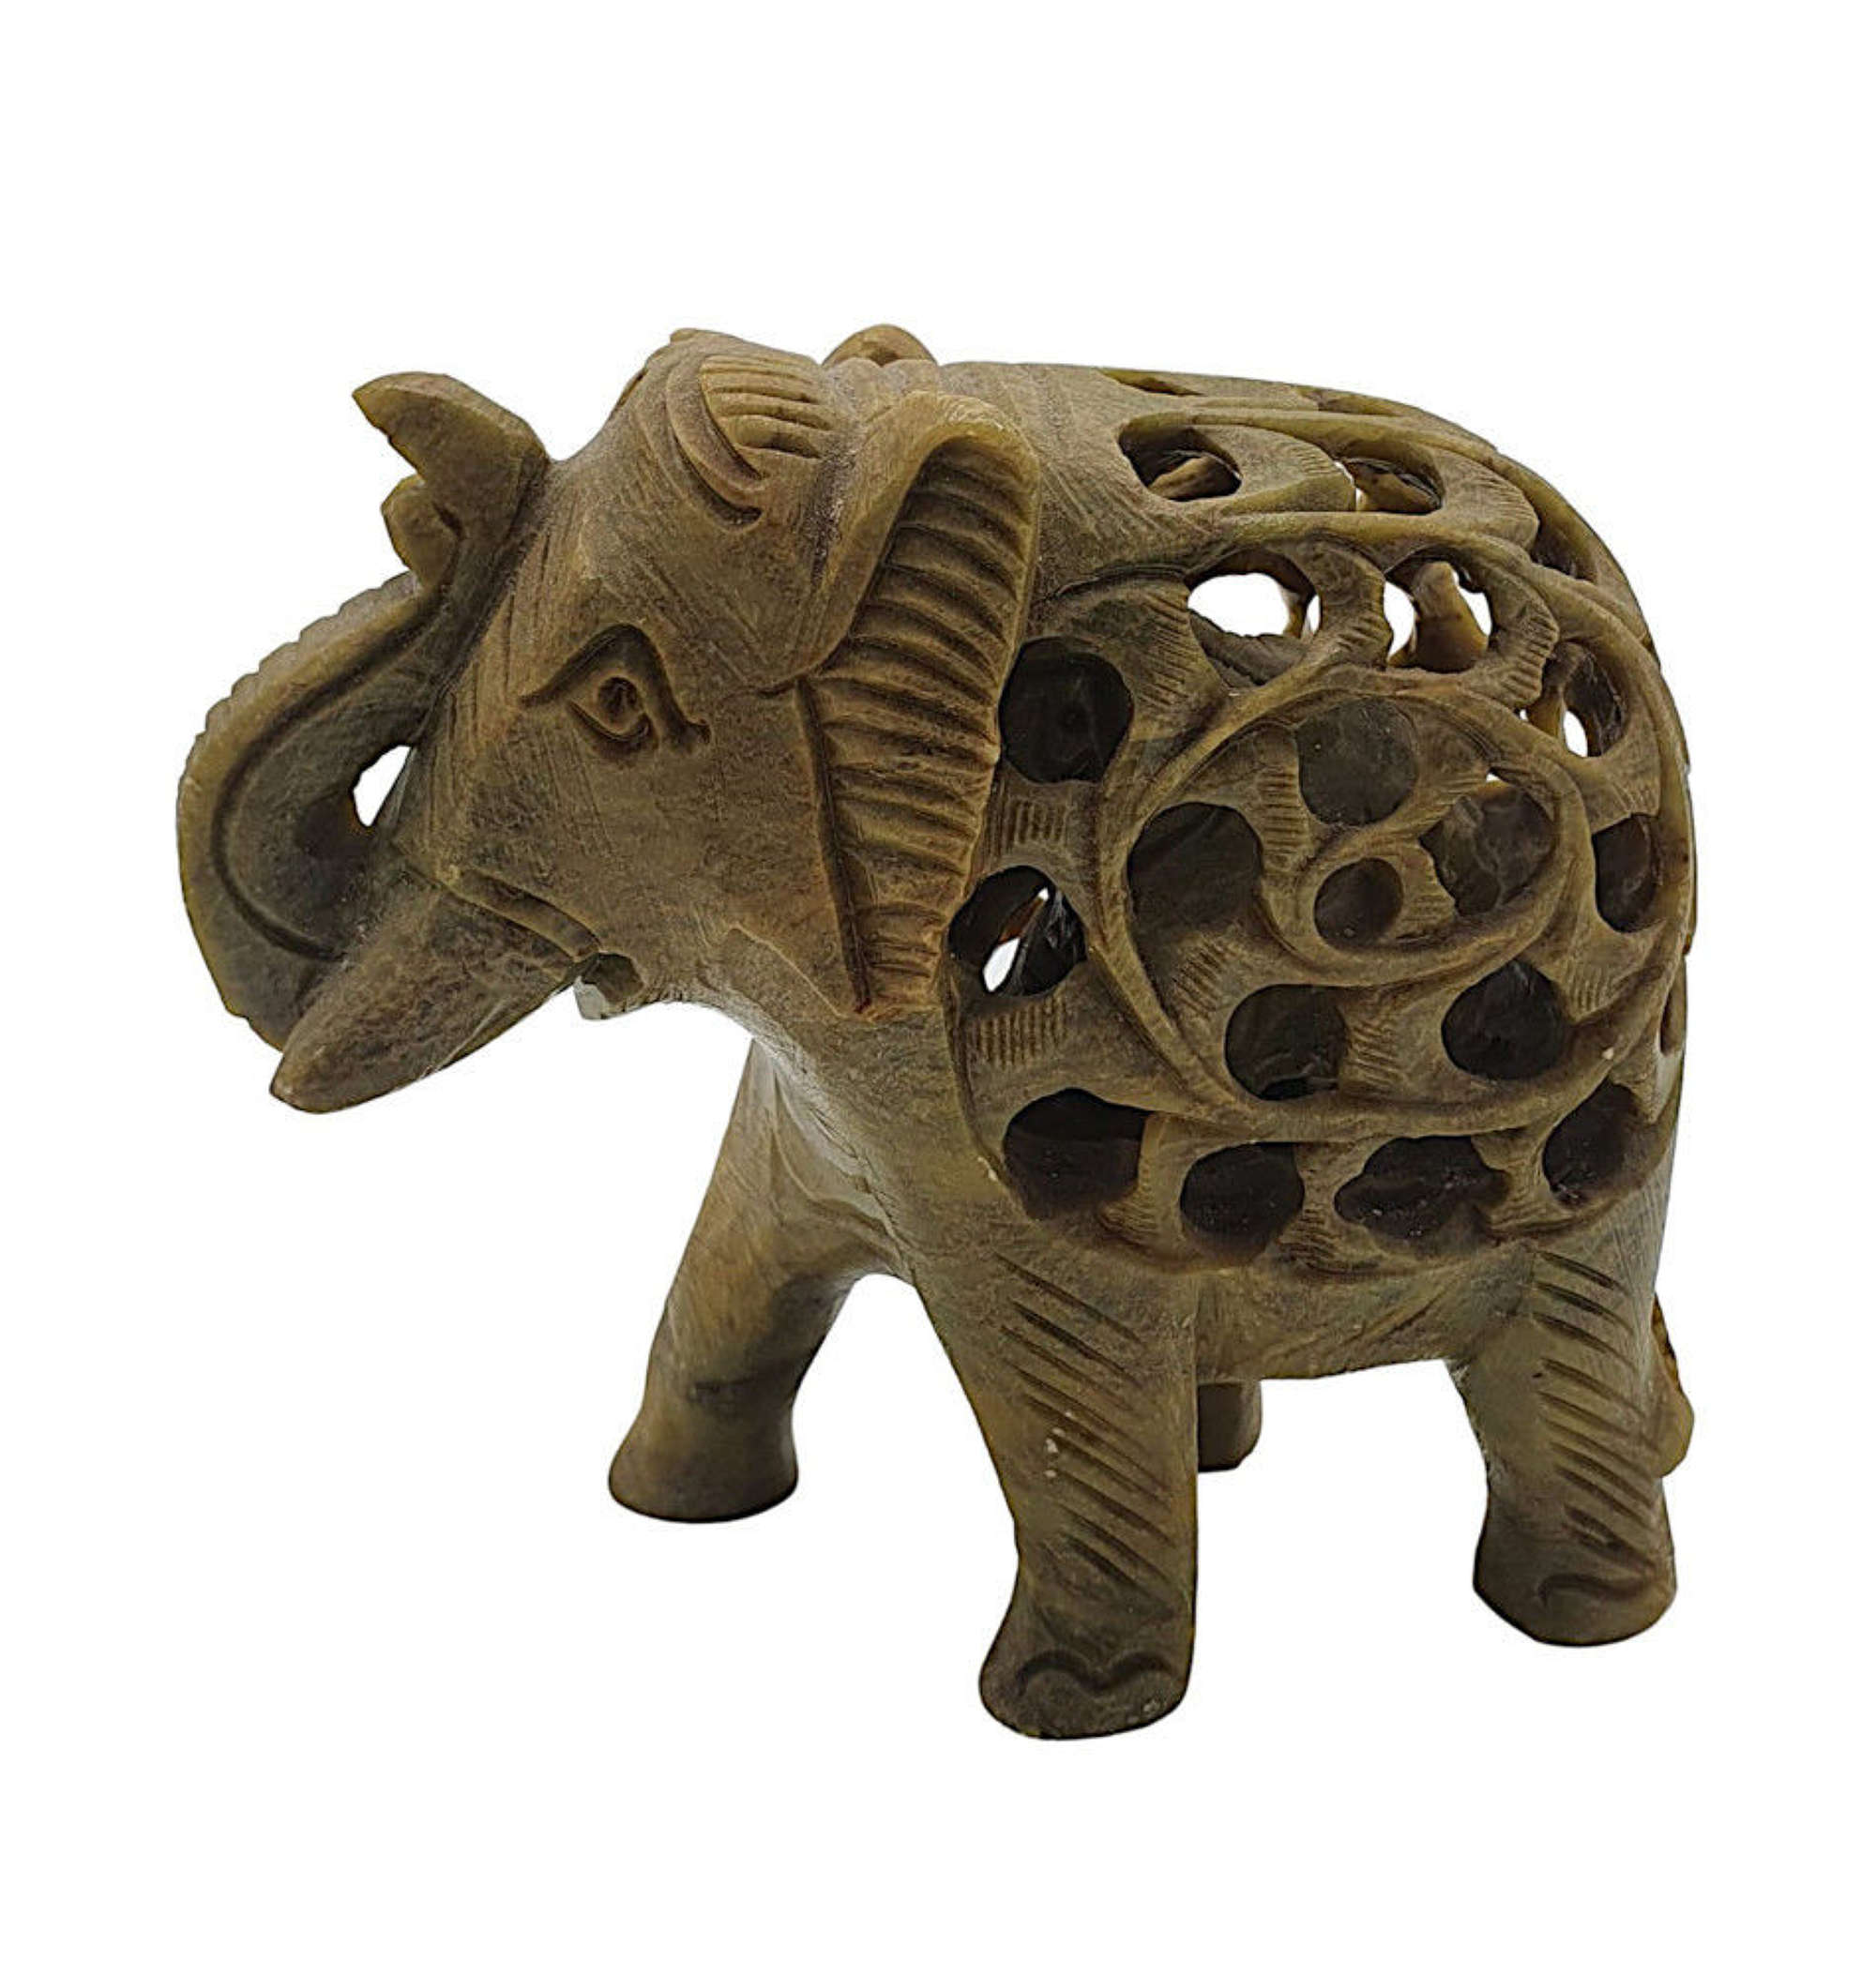 A Very Unique Vintage Hand Carved Soap Stone Figurine Depicting Elepha